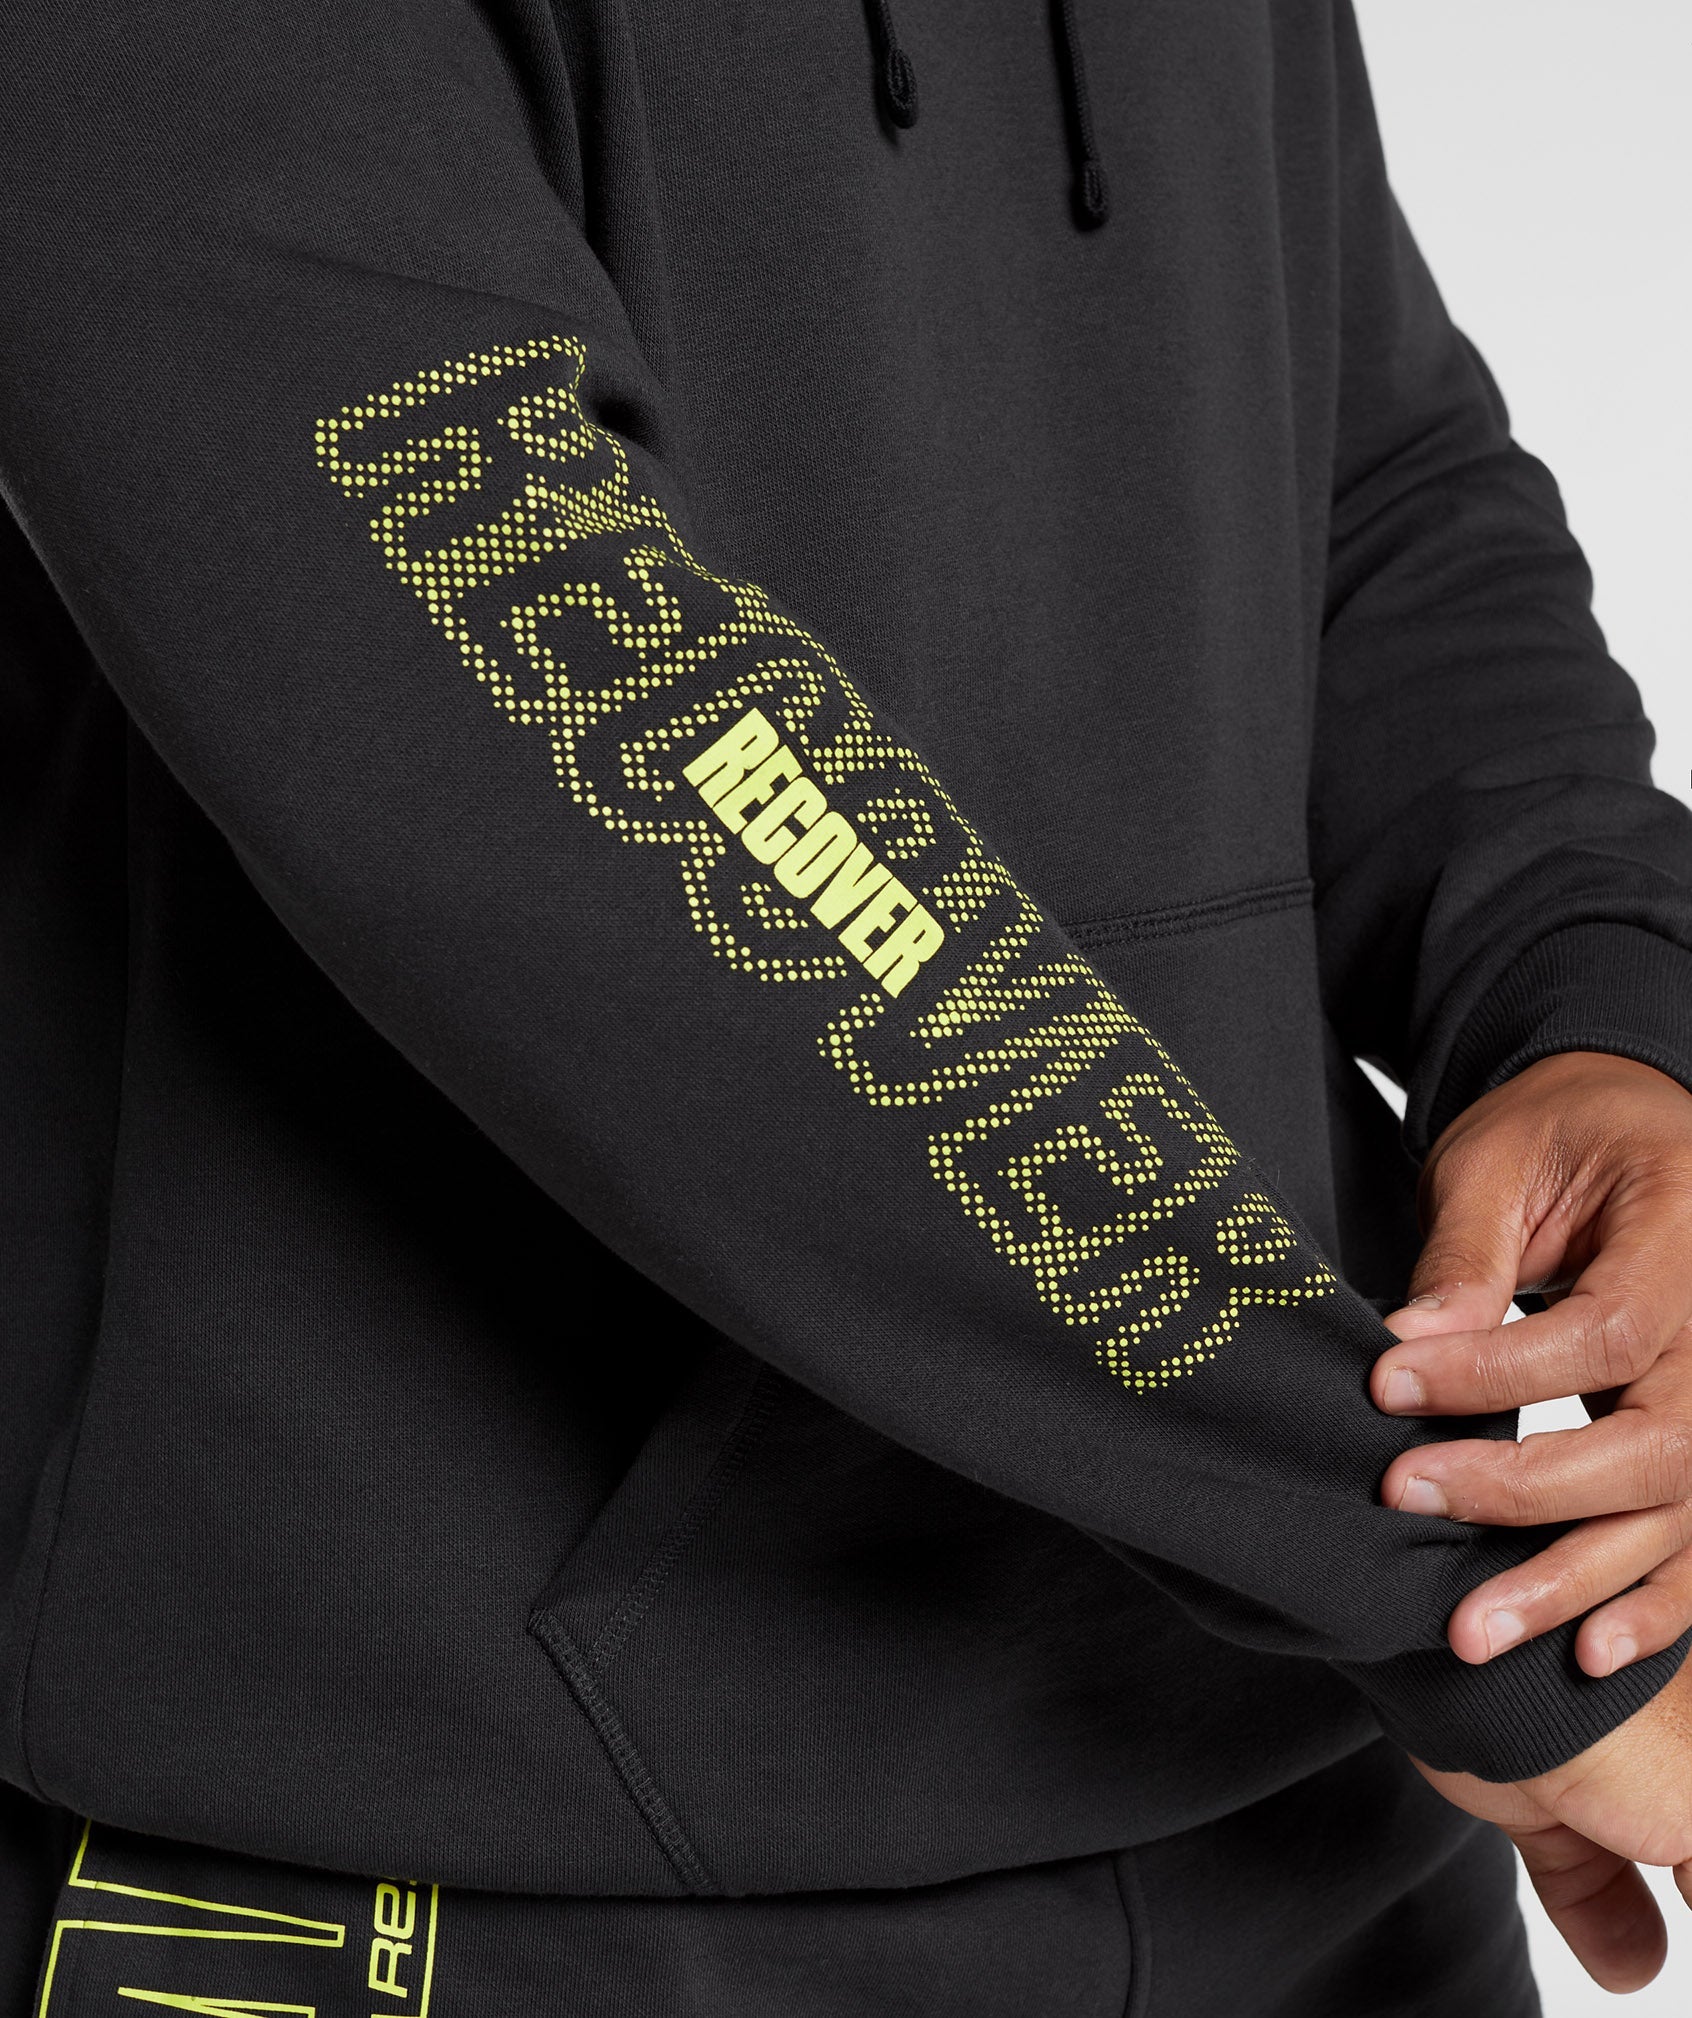 Recovery Graphic Hoodie in Black